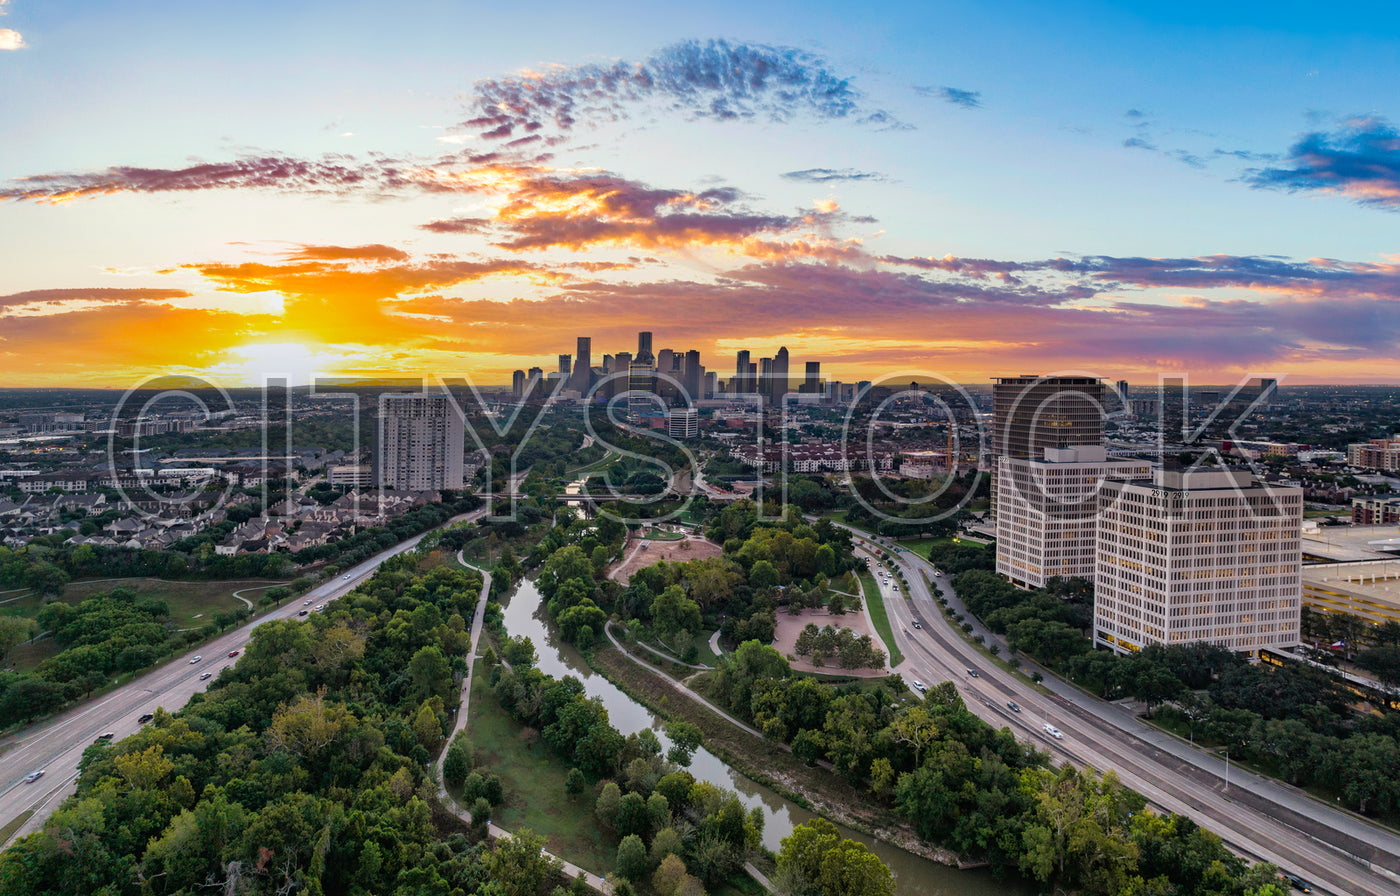 Panoramic sunset view of Houston skyline with highways and parks